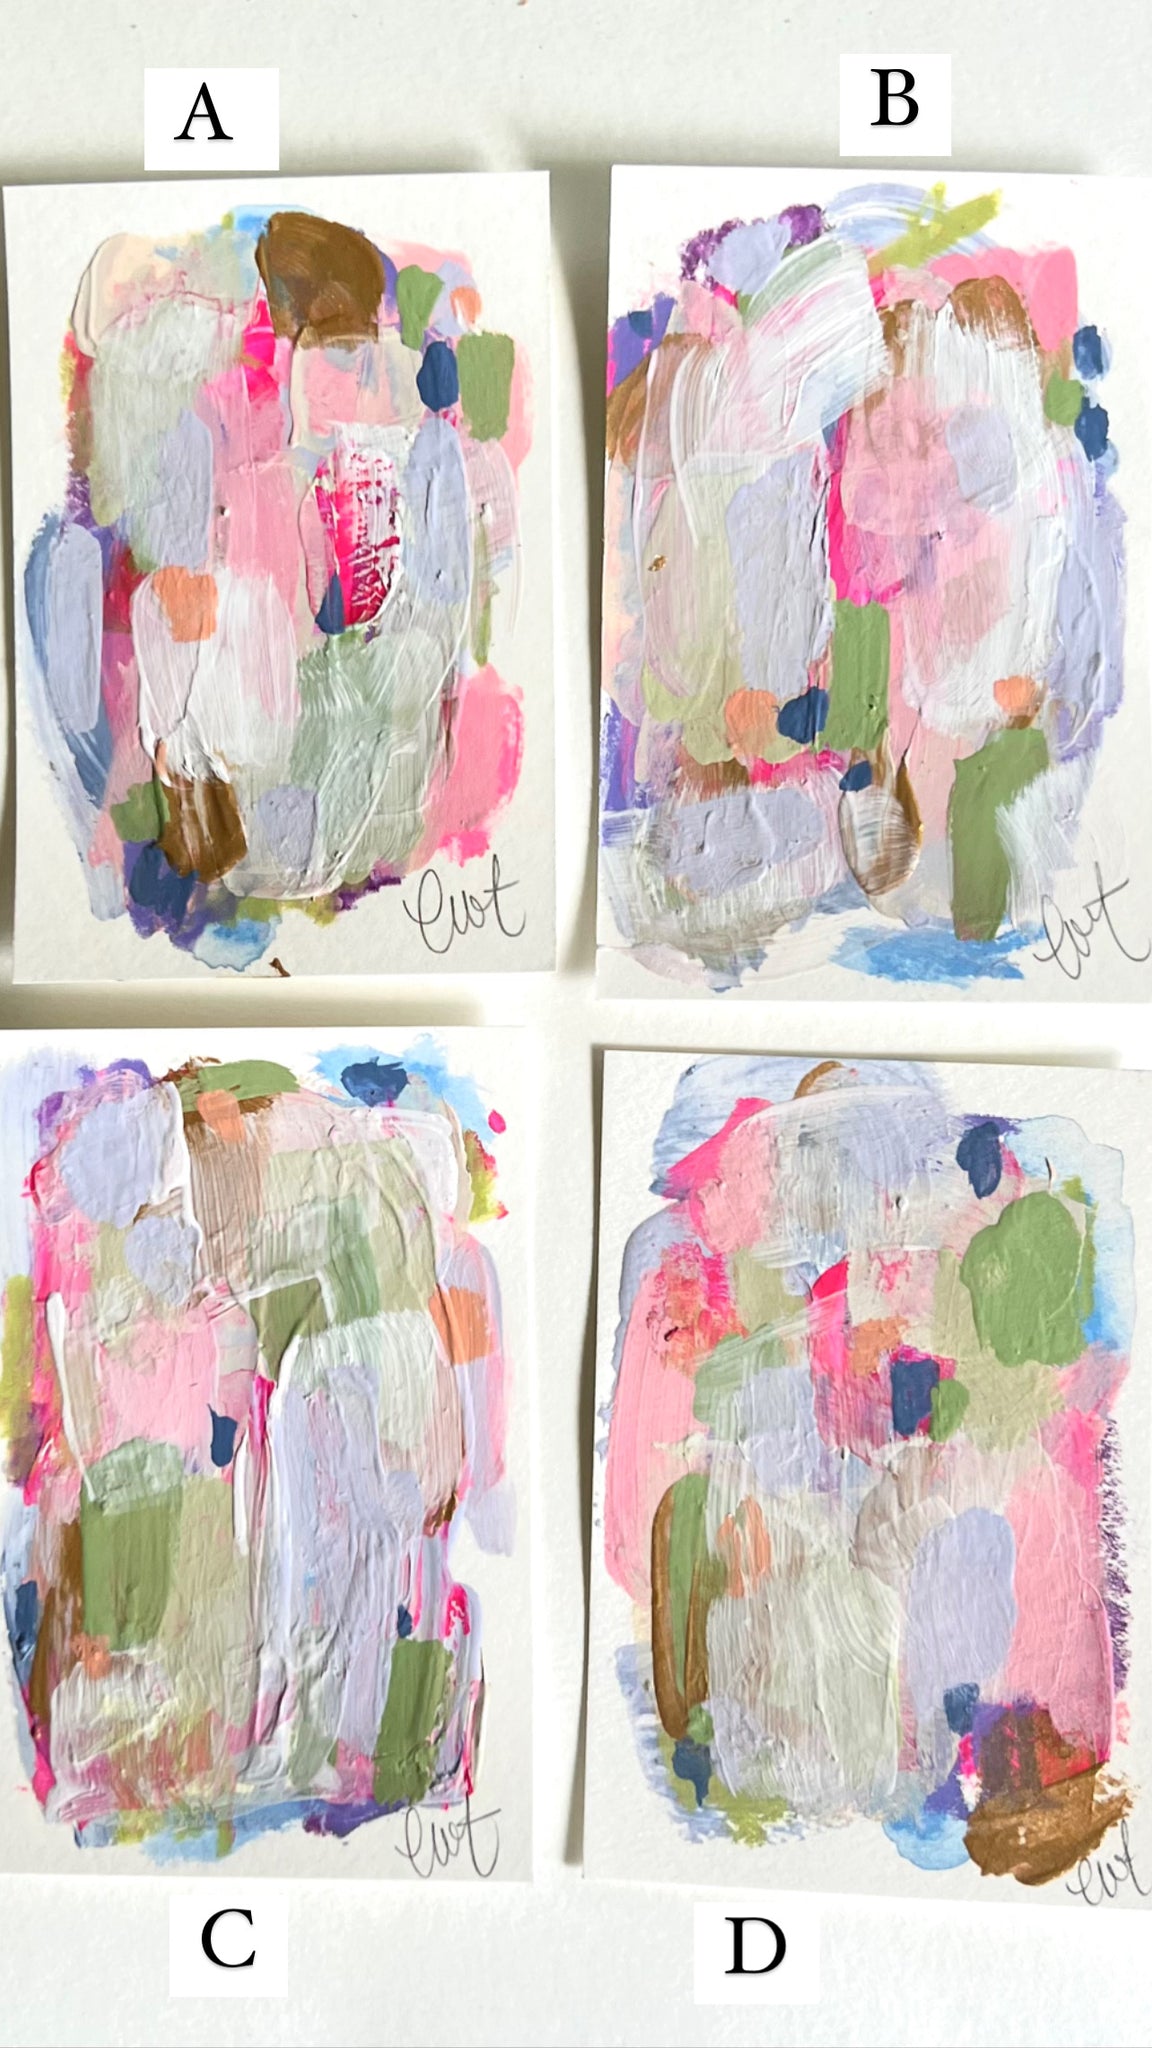 3 x 4.5 inch Abstracts on Paper